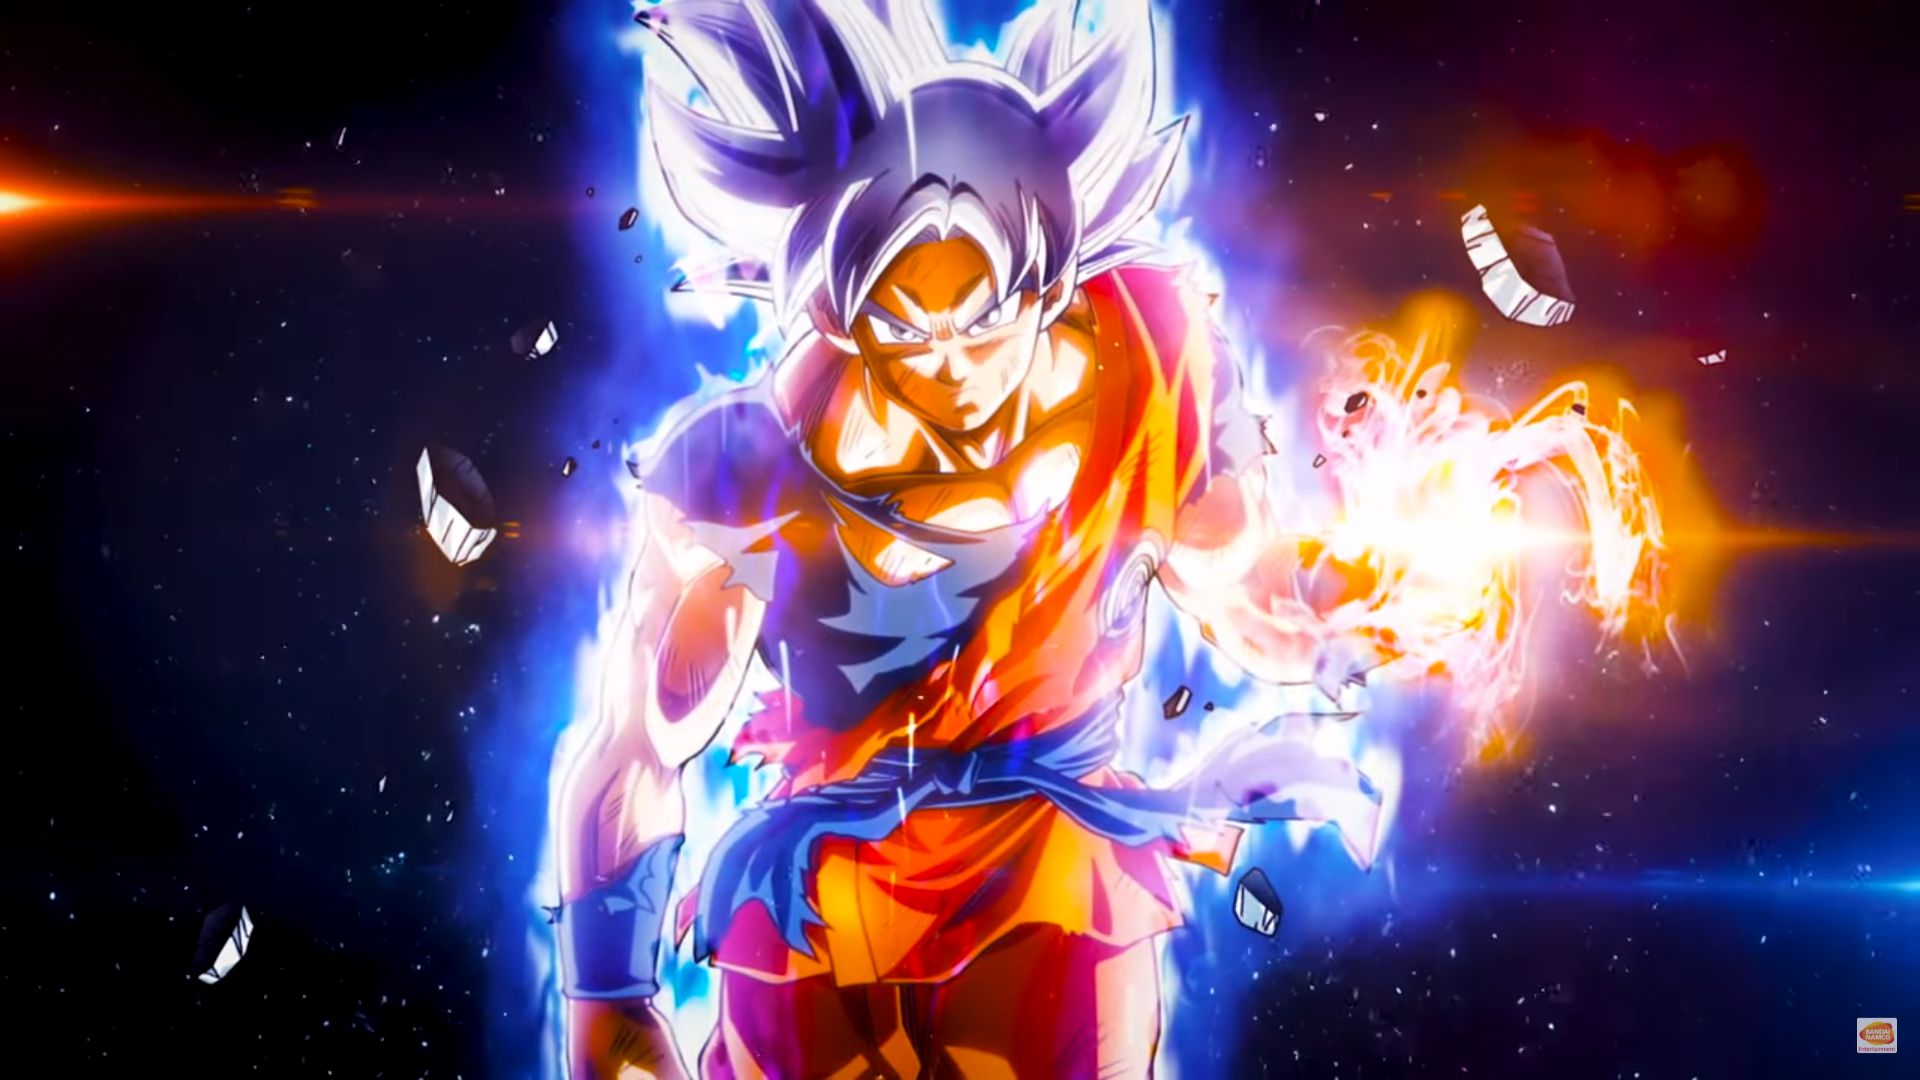 Super Dragon Ball Heroes Shares Thrilling Poster for Season 2